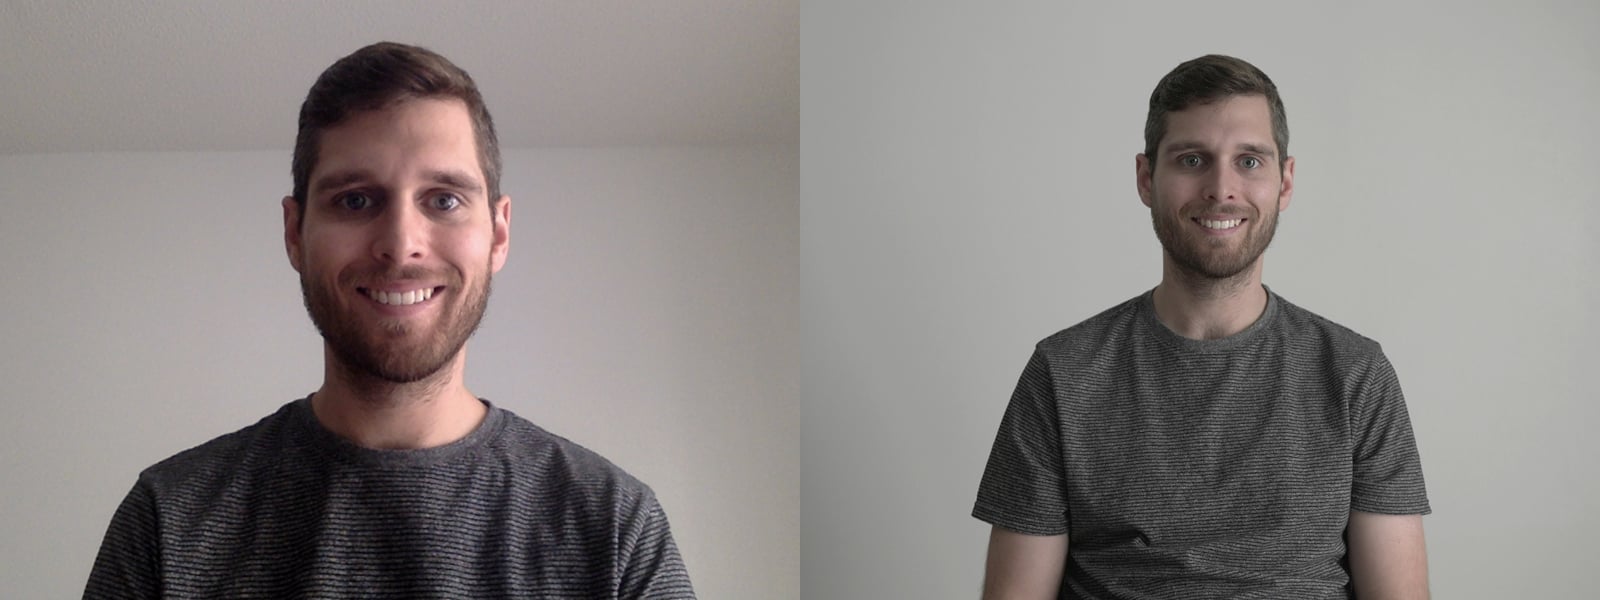 difference between webcam and Sony A7iii used as webcam